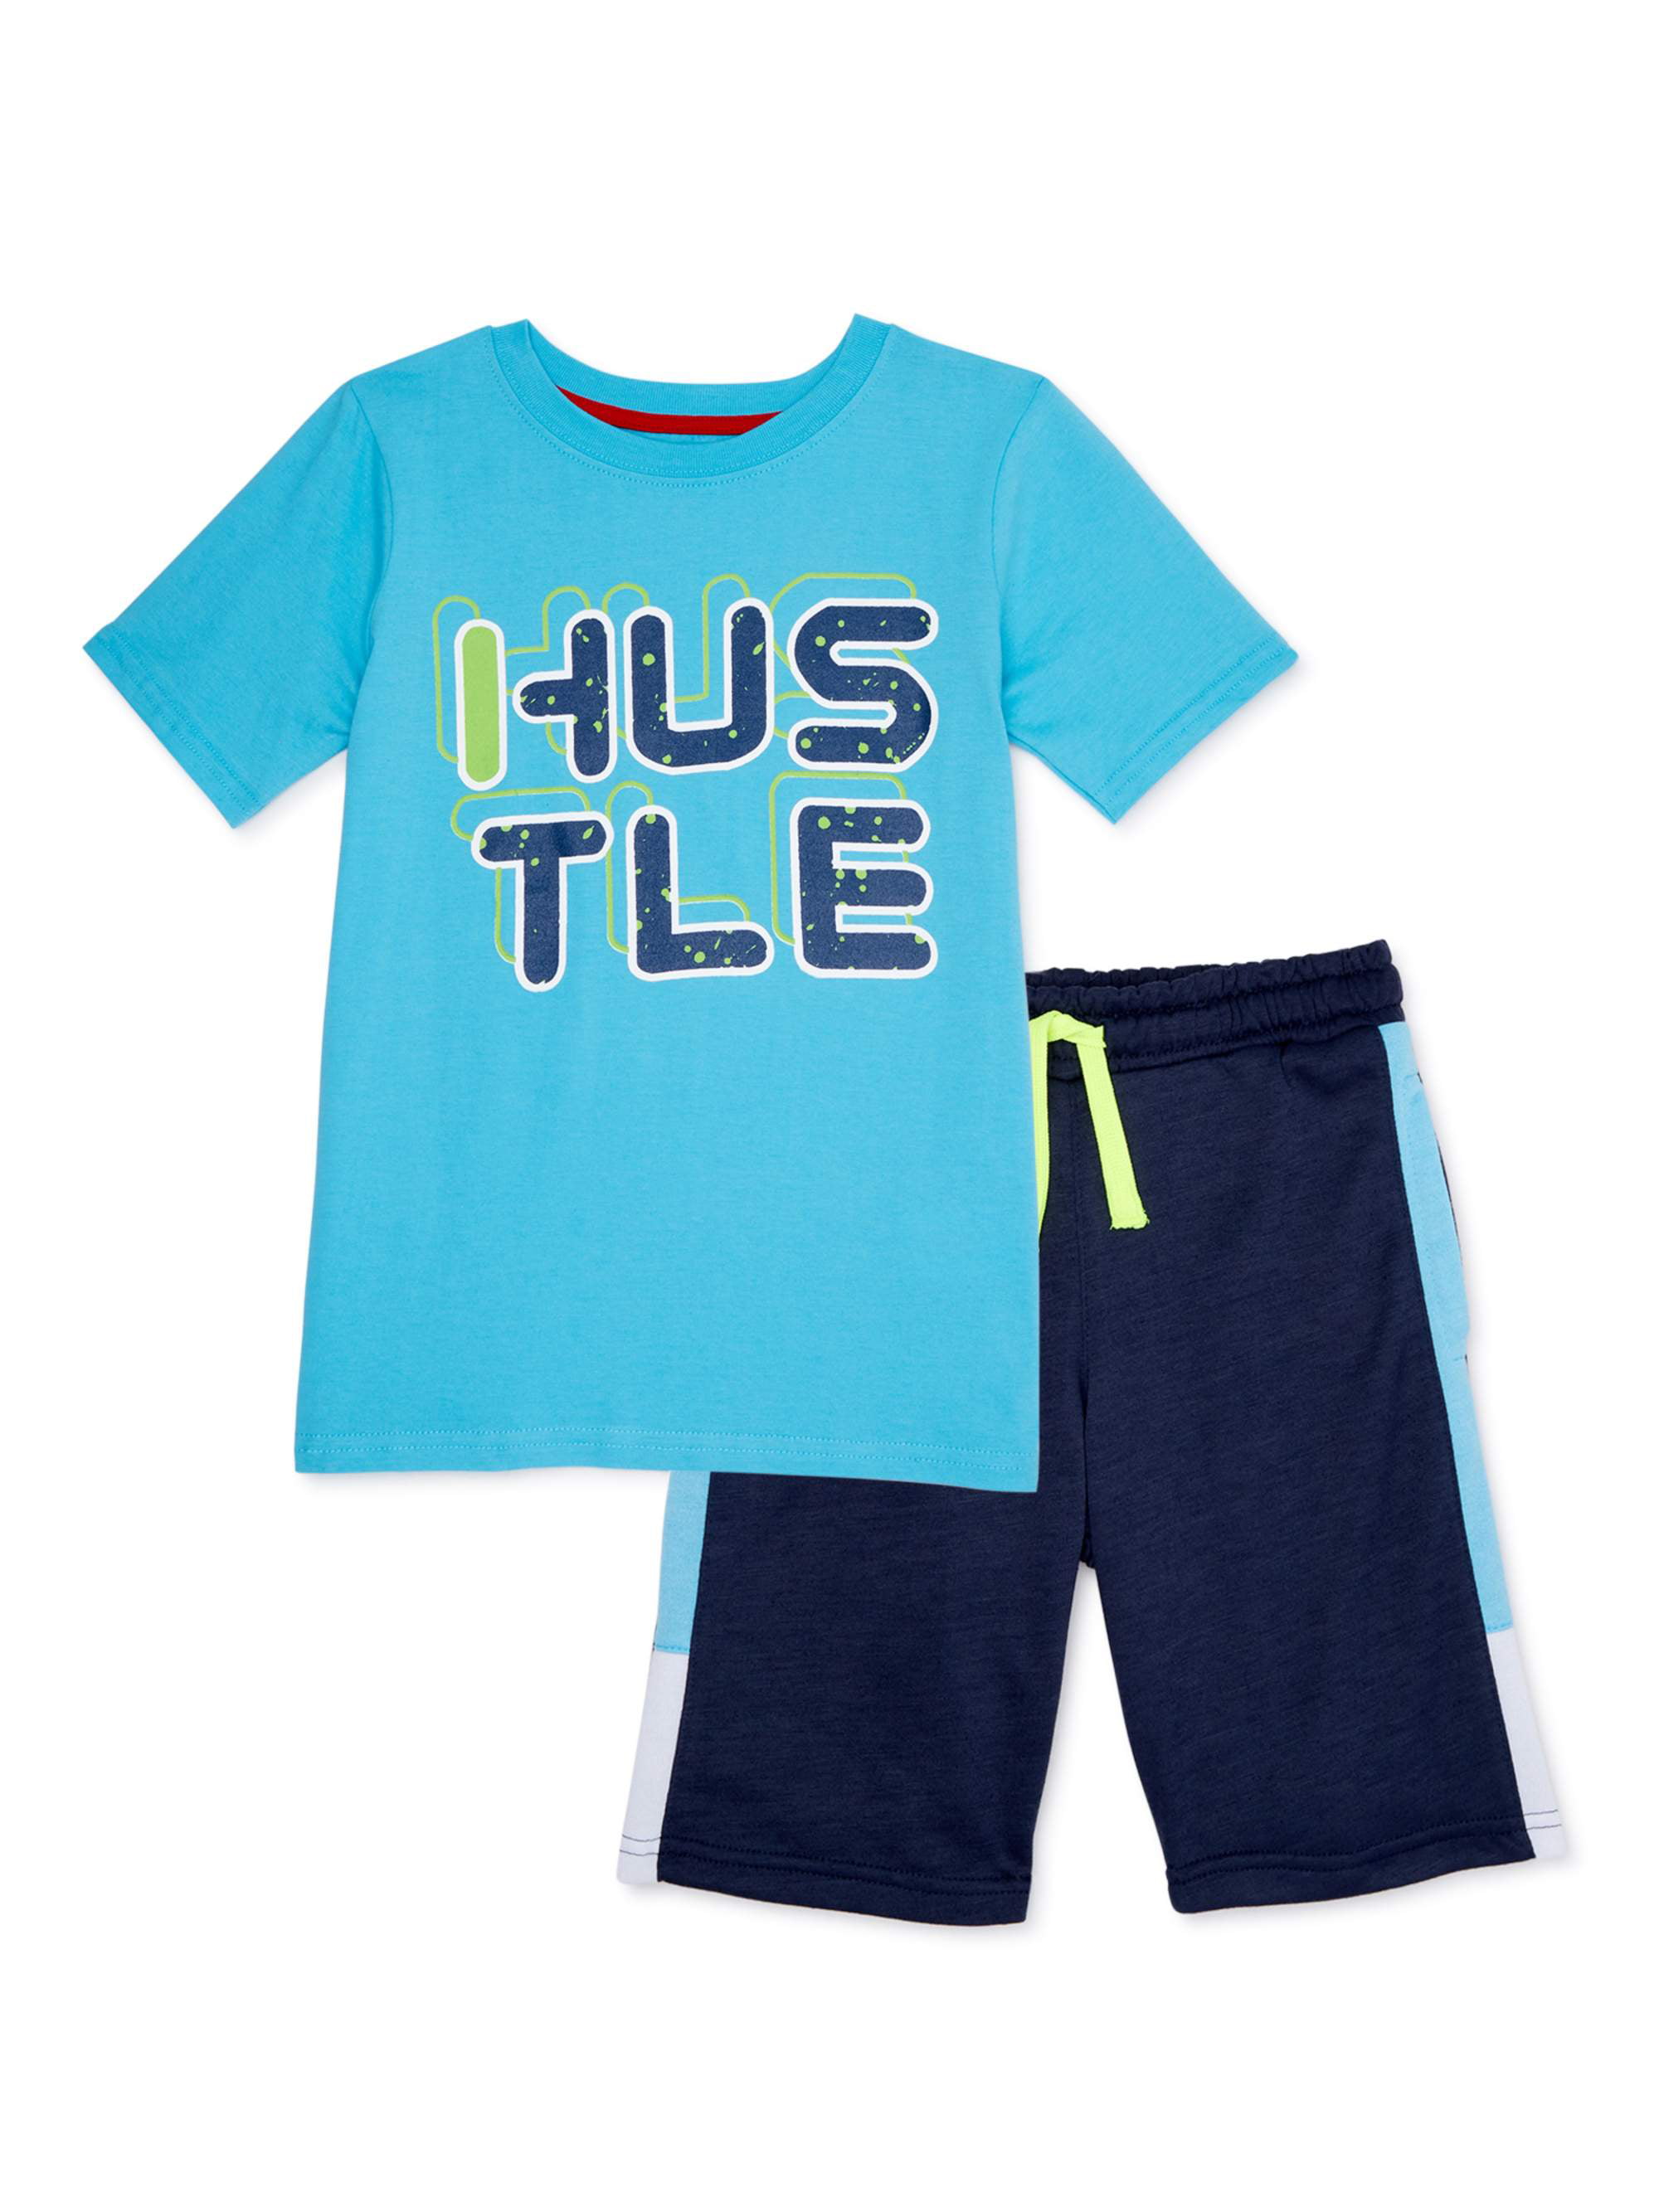 LR Scoop Boys 8-12 Short Sleeve T-Shirt and Knit Shorts, 2-Piece Outfit ...